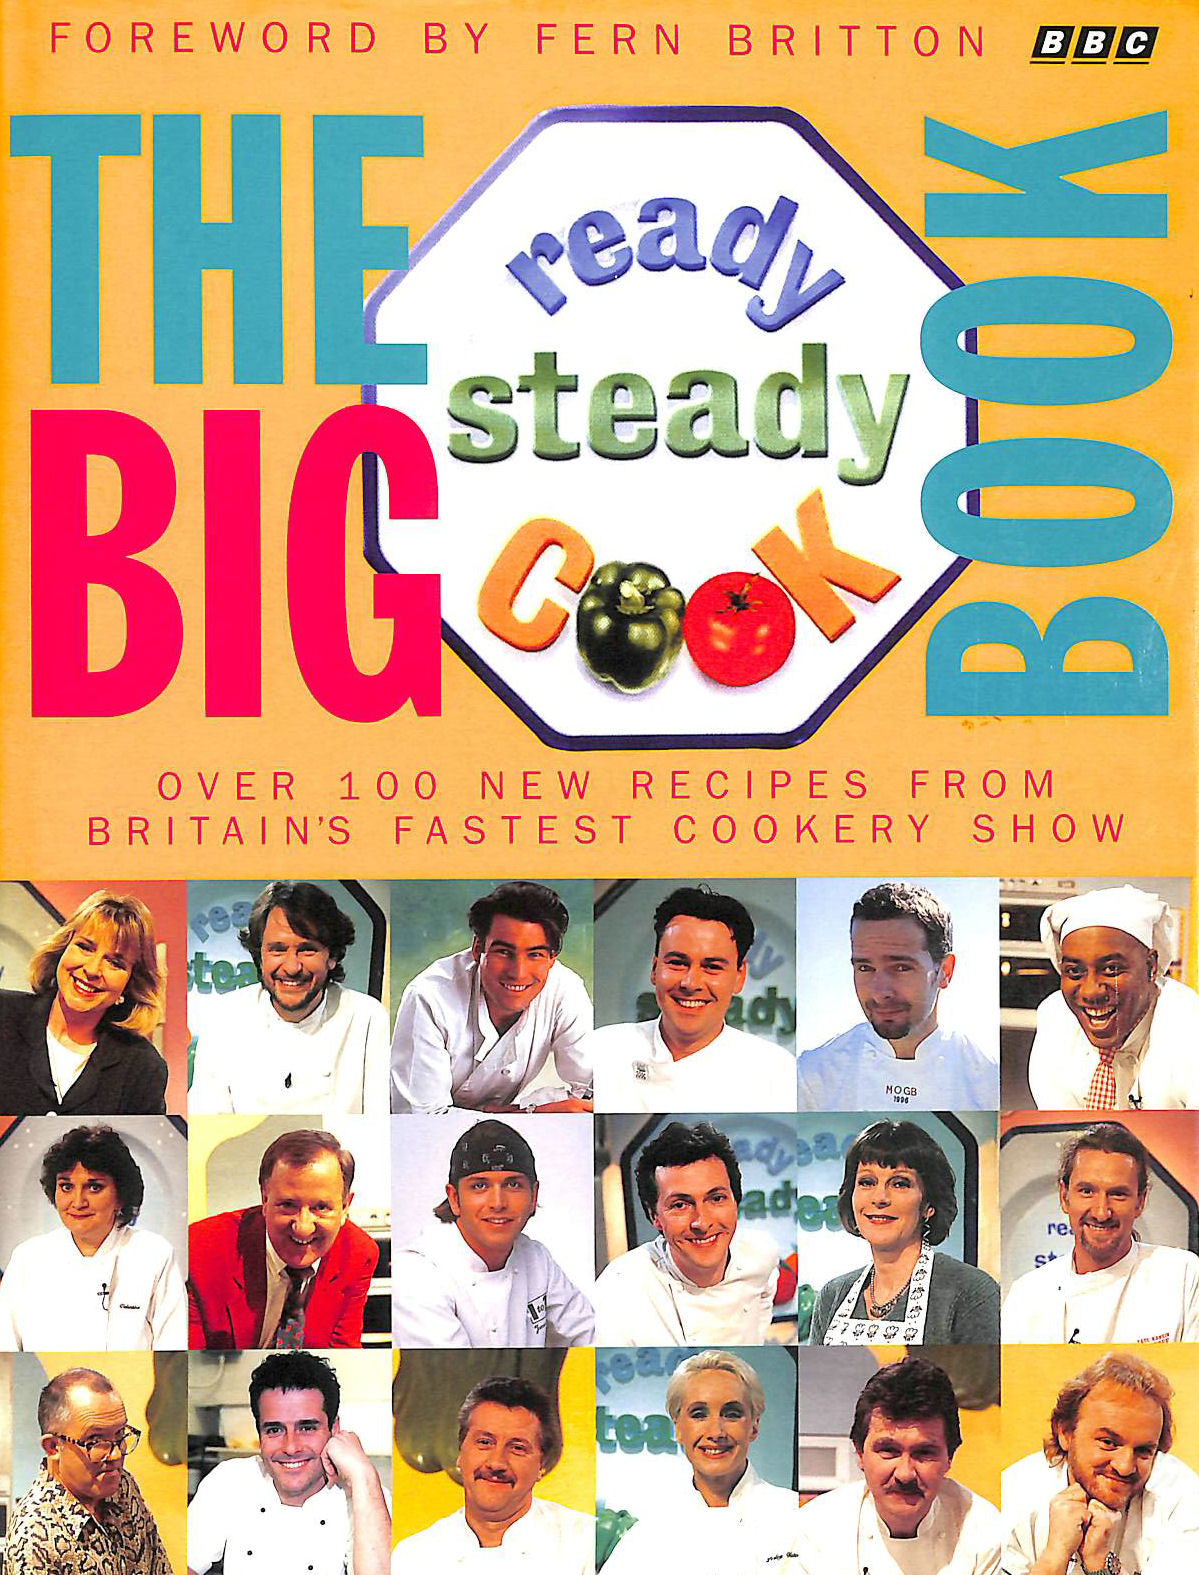 NO AUTHOR - The Big Ready Steady Cook Book